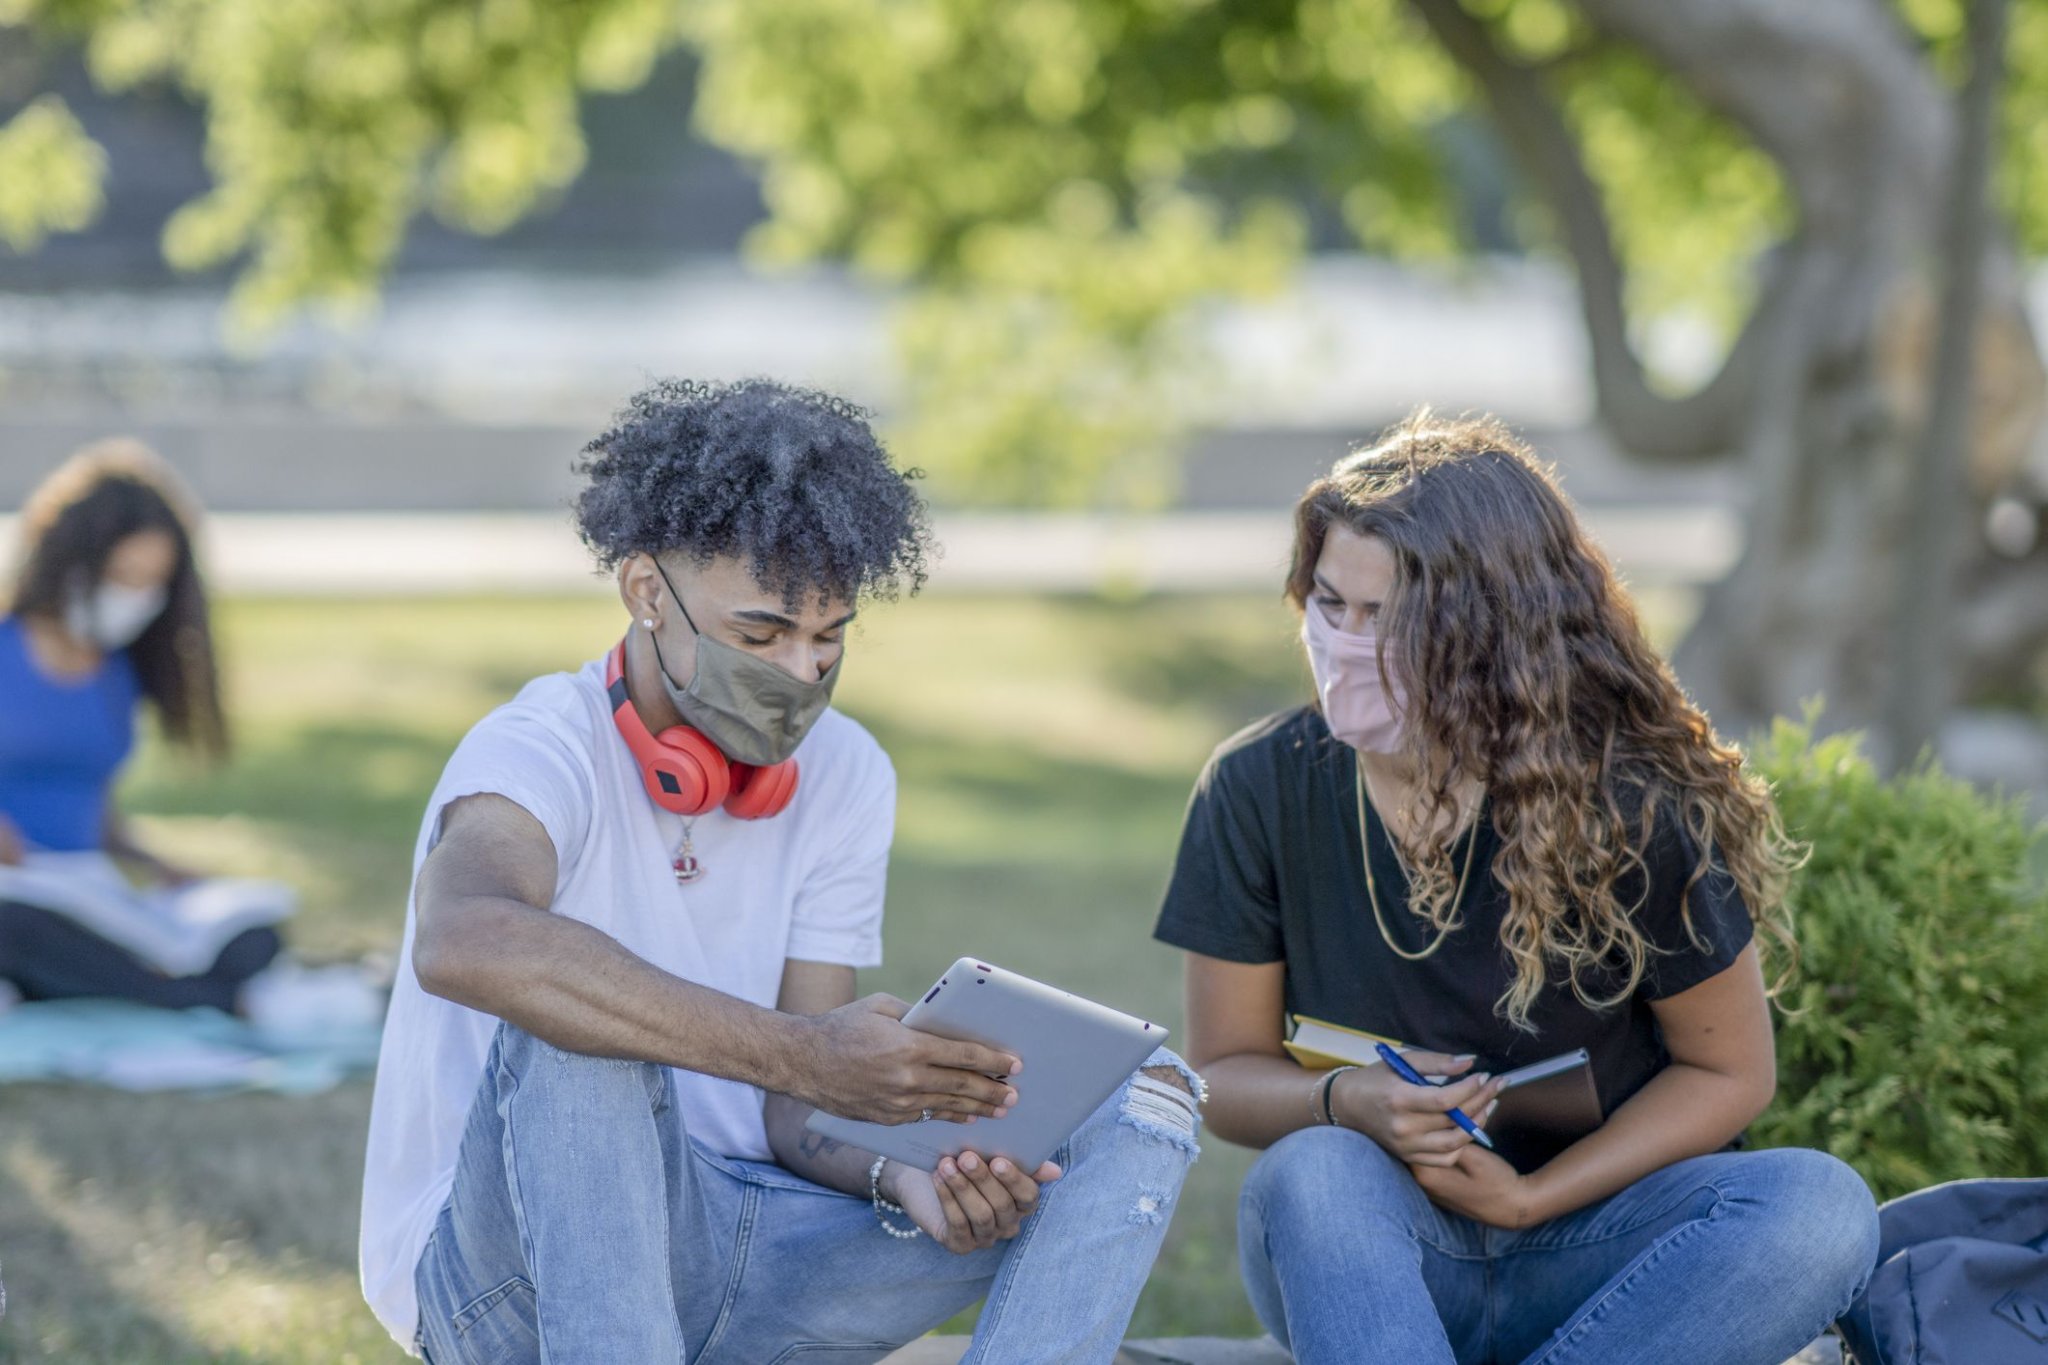 Peer Counseling May Reach Teens in Ways That Adults Can't